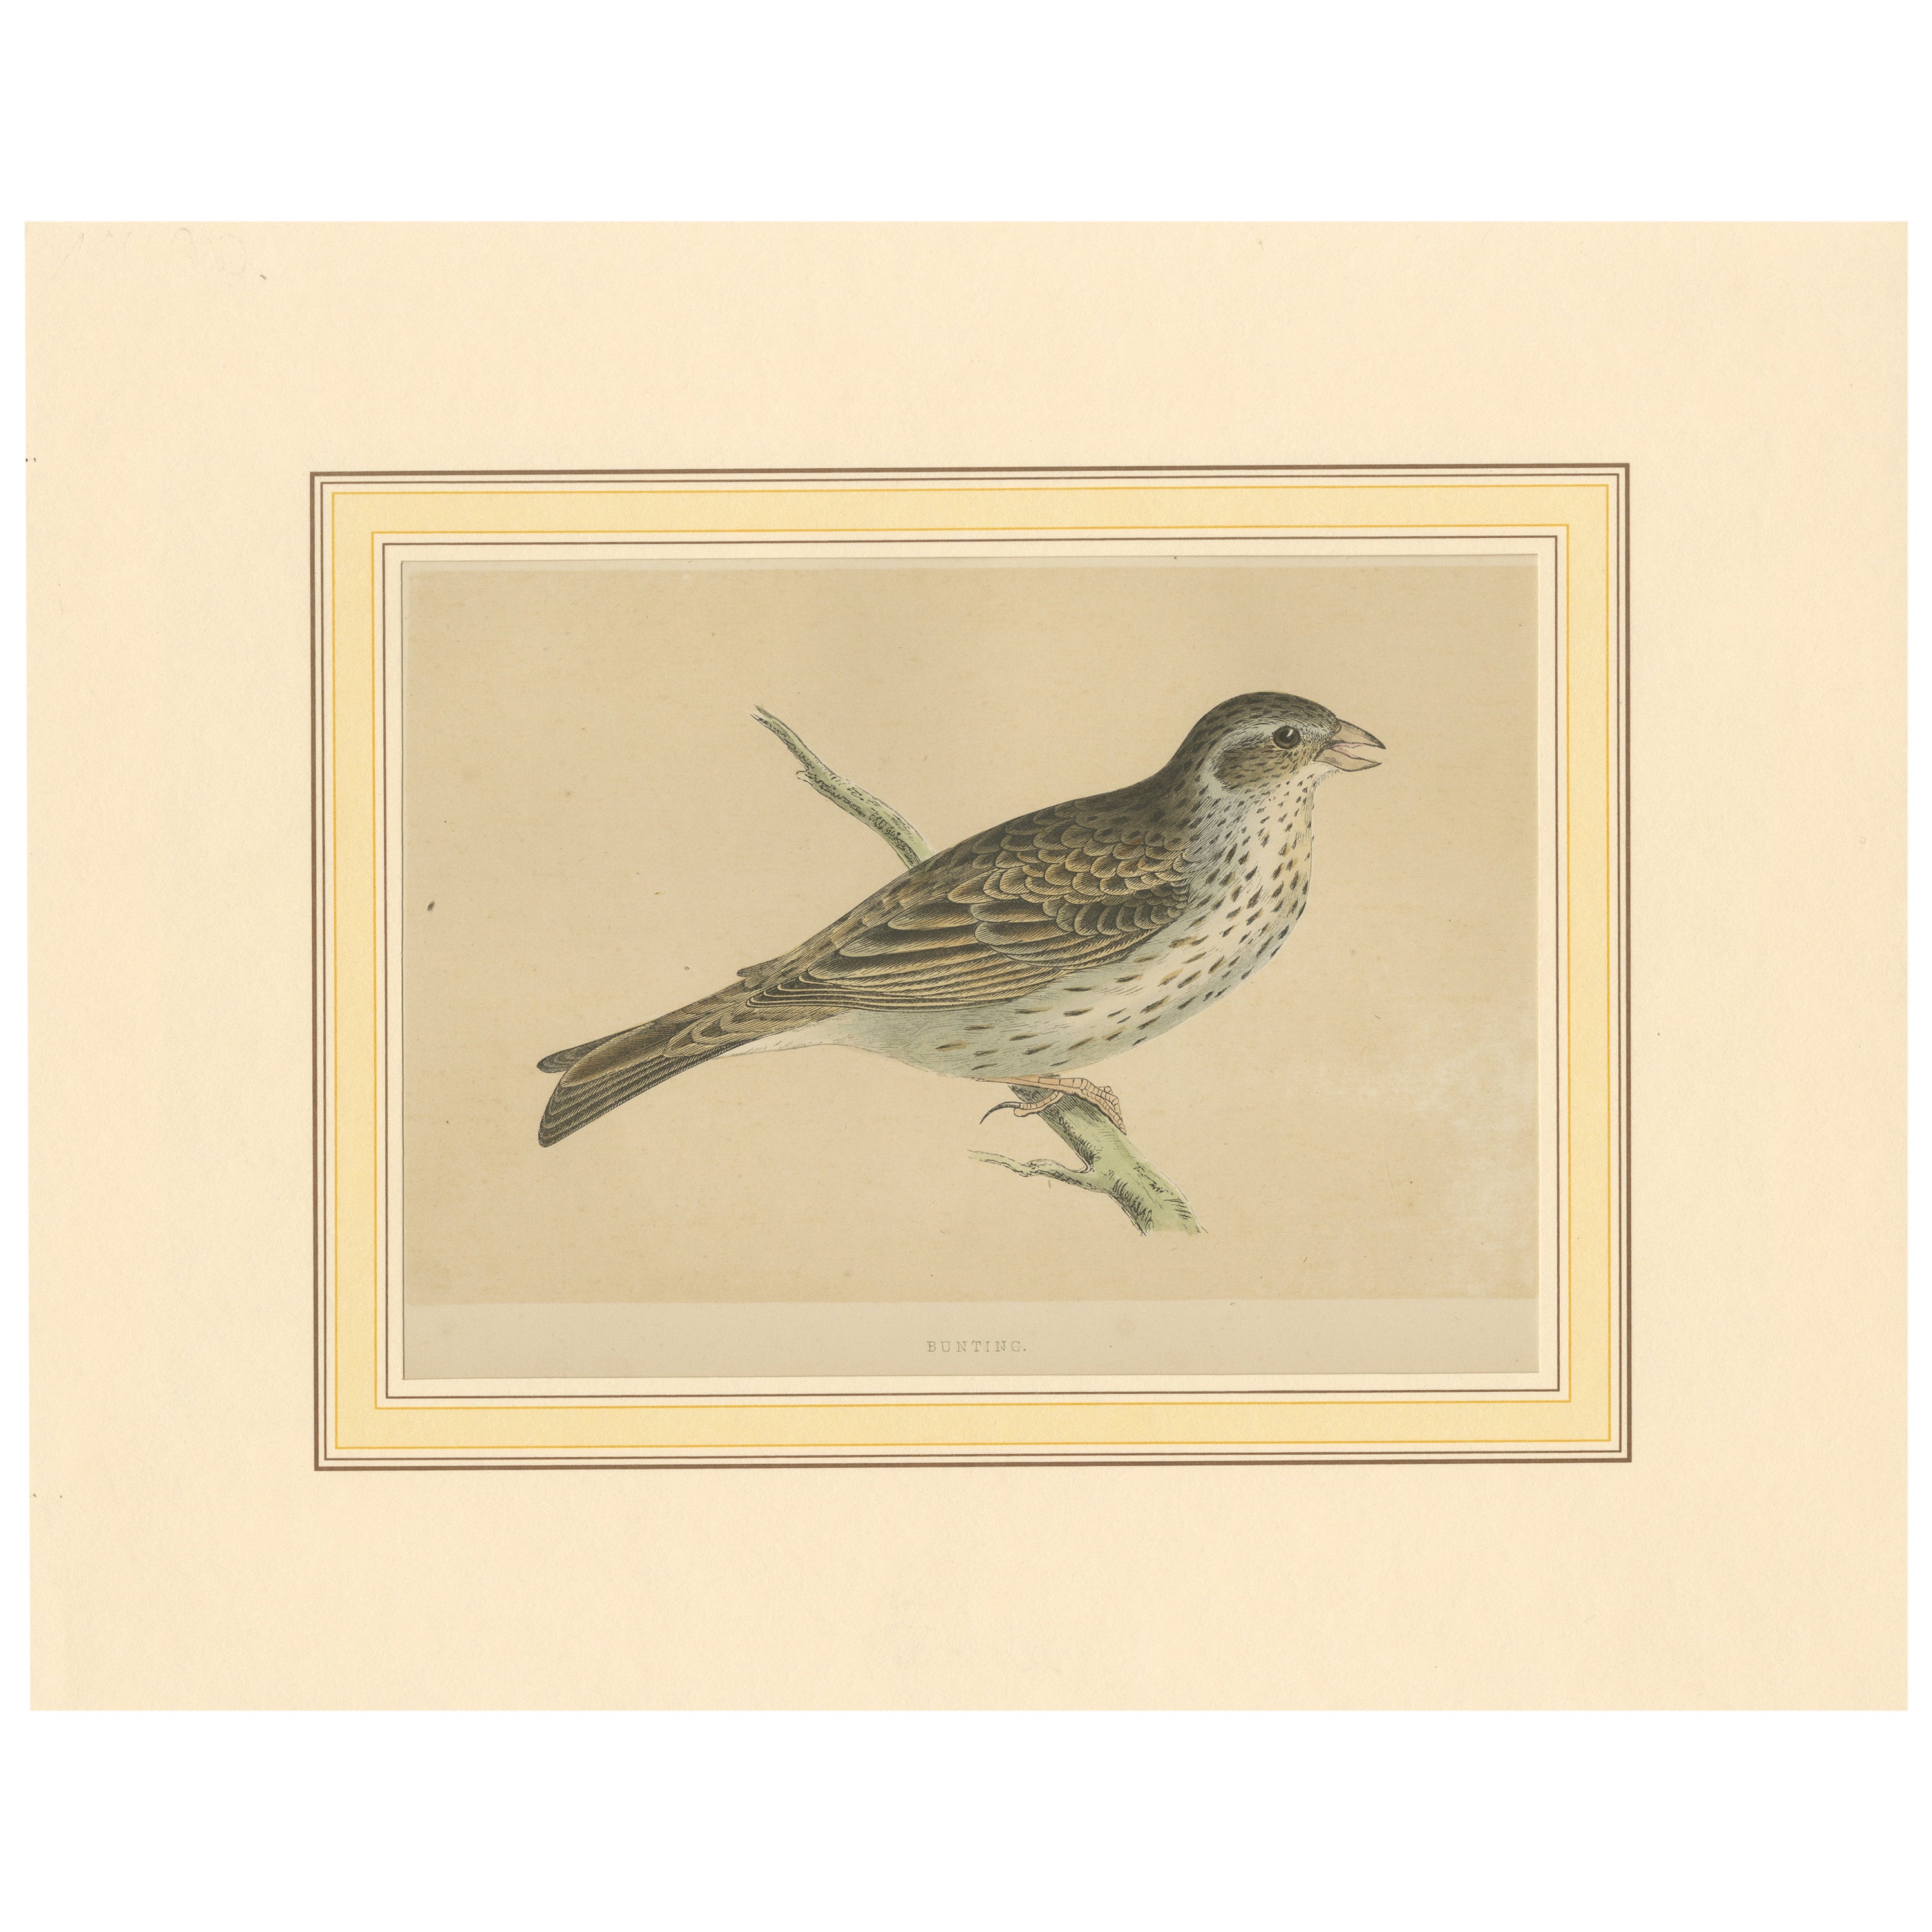 Antique Bird Print of a Bunting